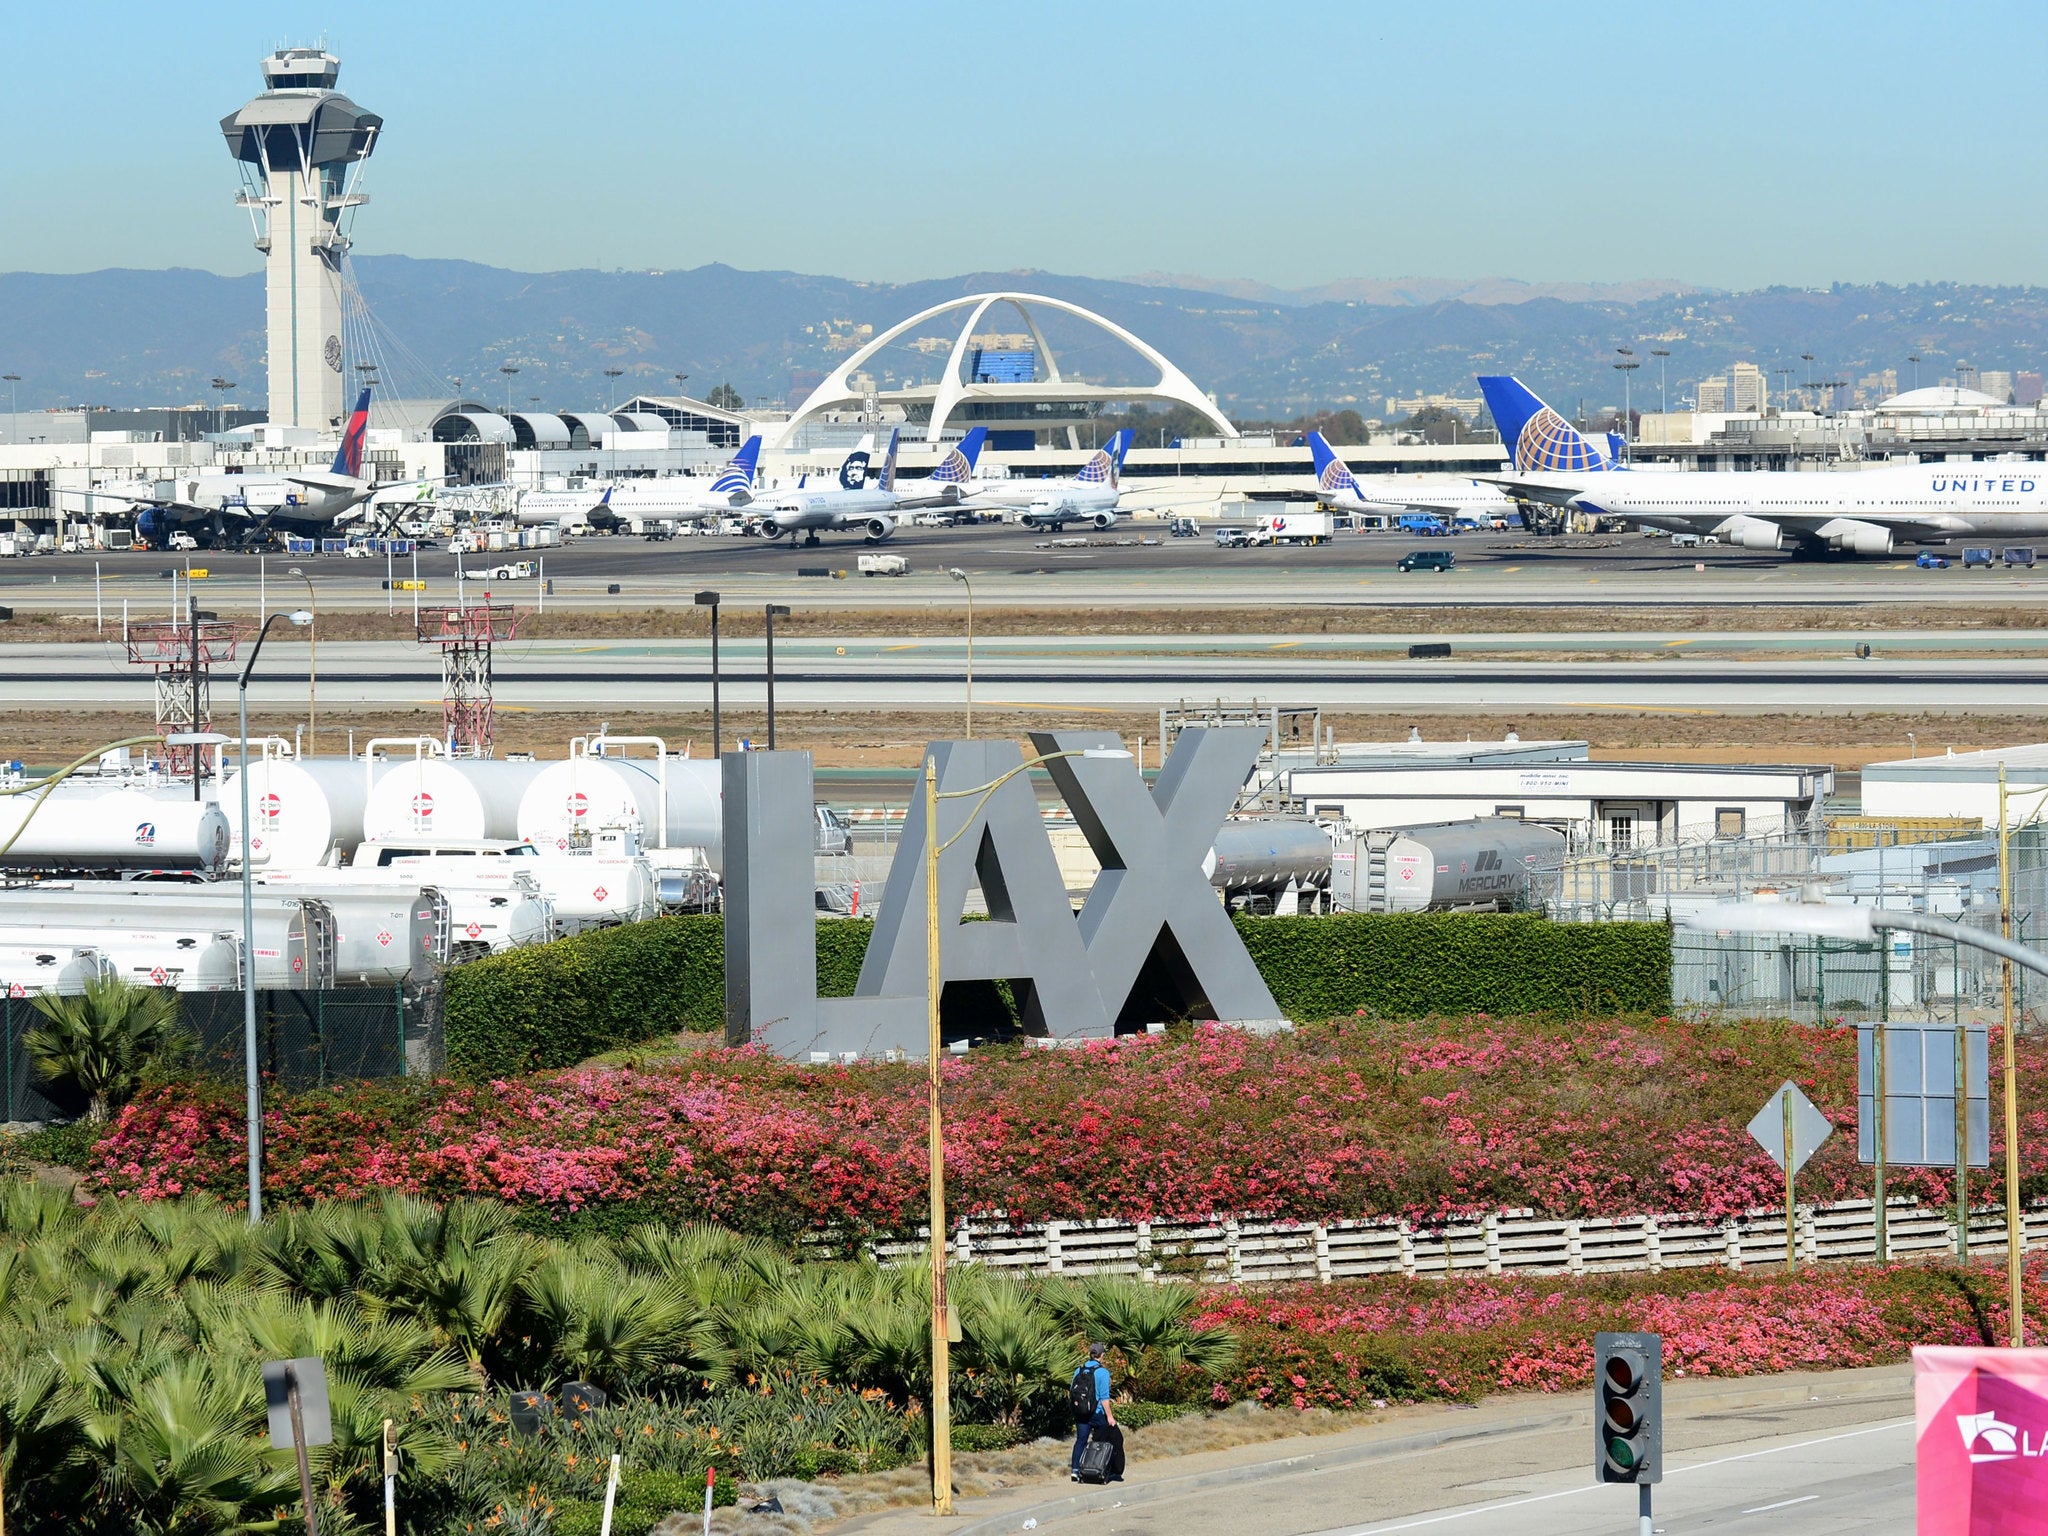 70 million passengers pass through Los Angeles airport annually